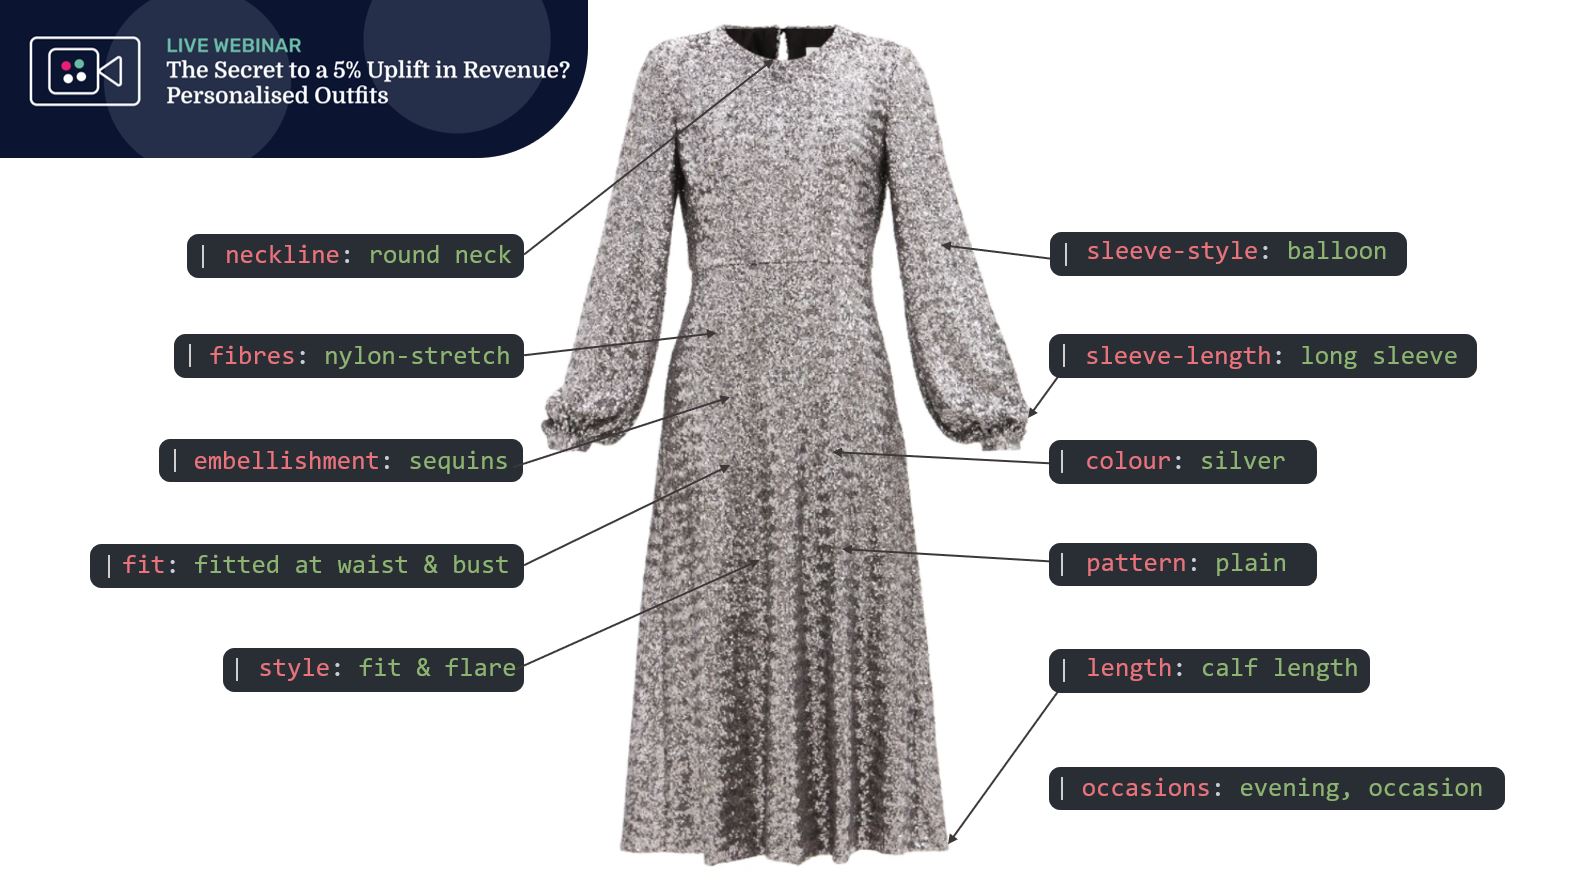 Example of a set of Dressipi's garment attributes for a dress